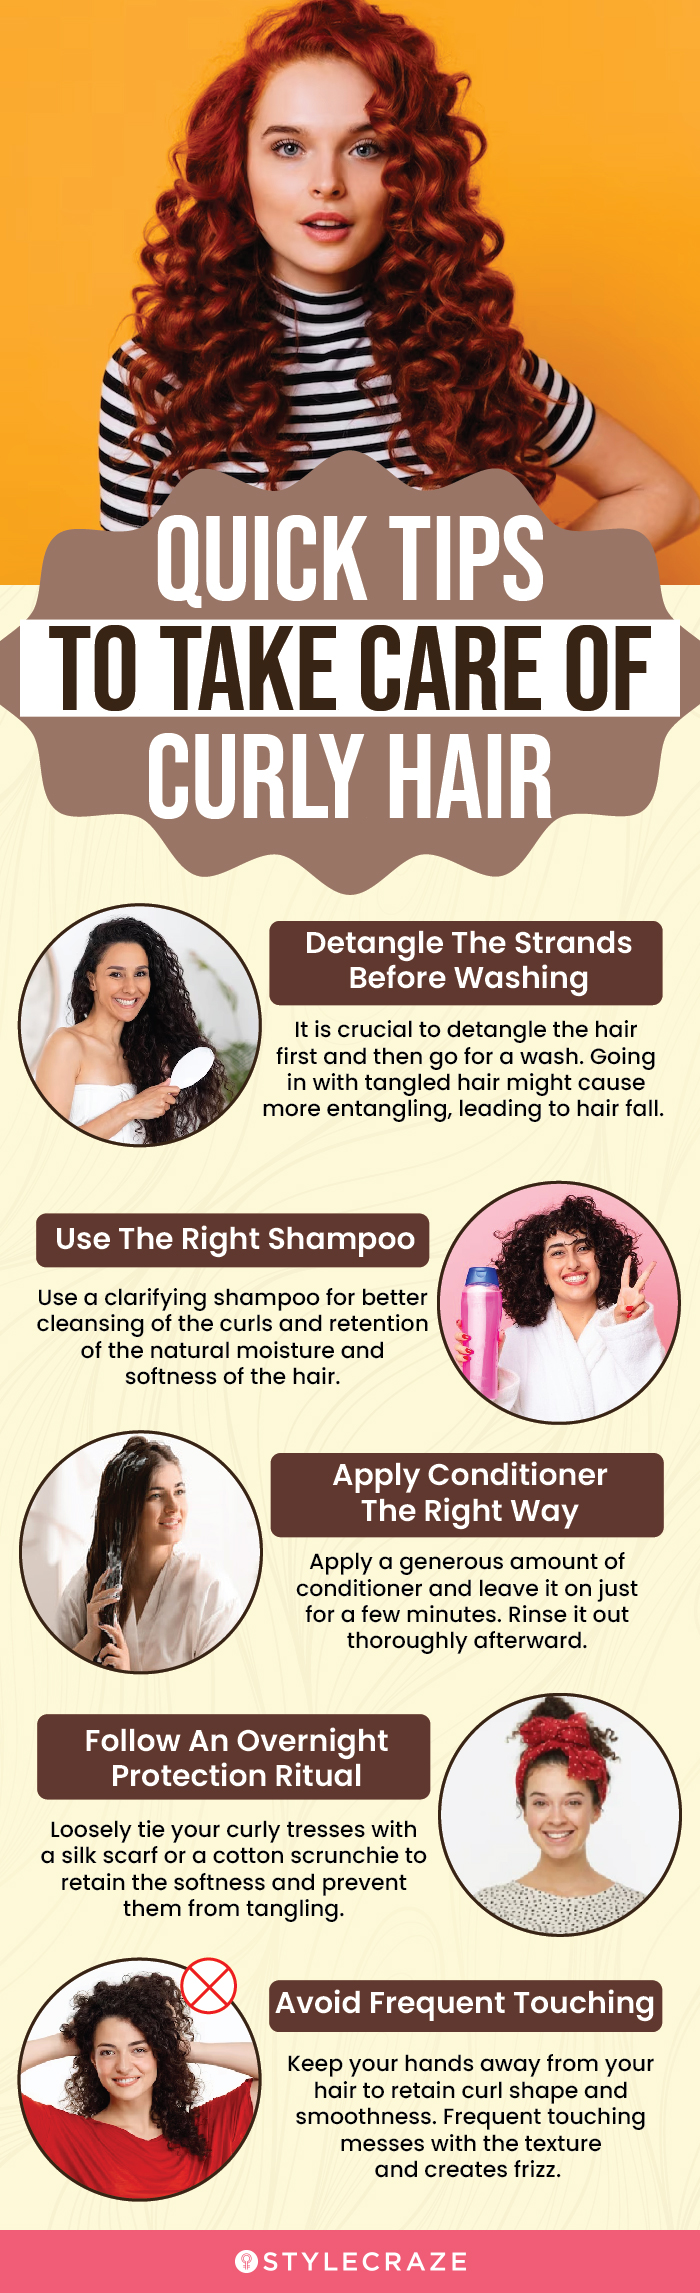 Quick Tips To Take Care Of Curly Hair (infographic)